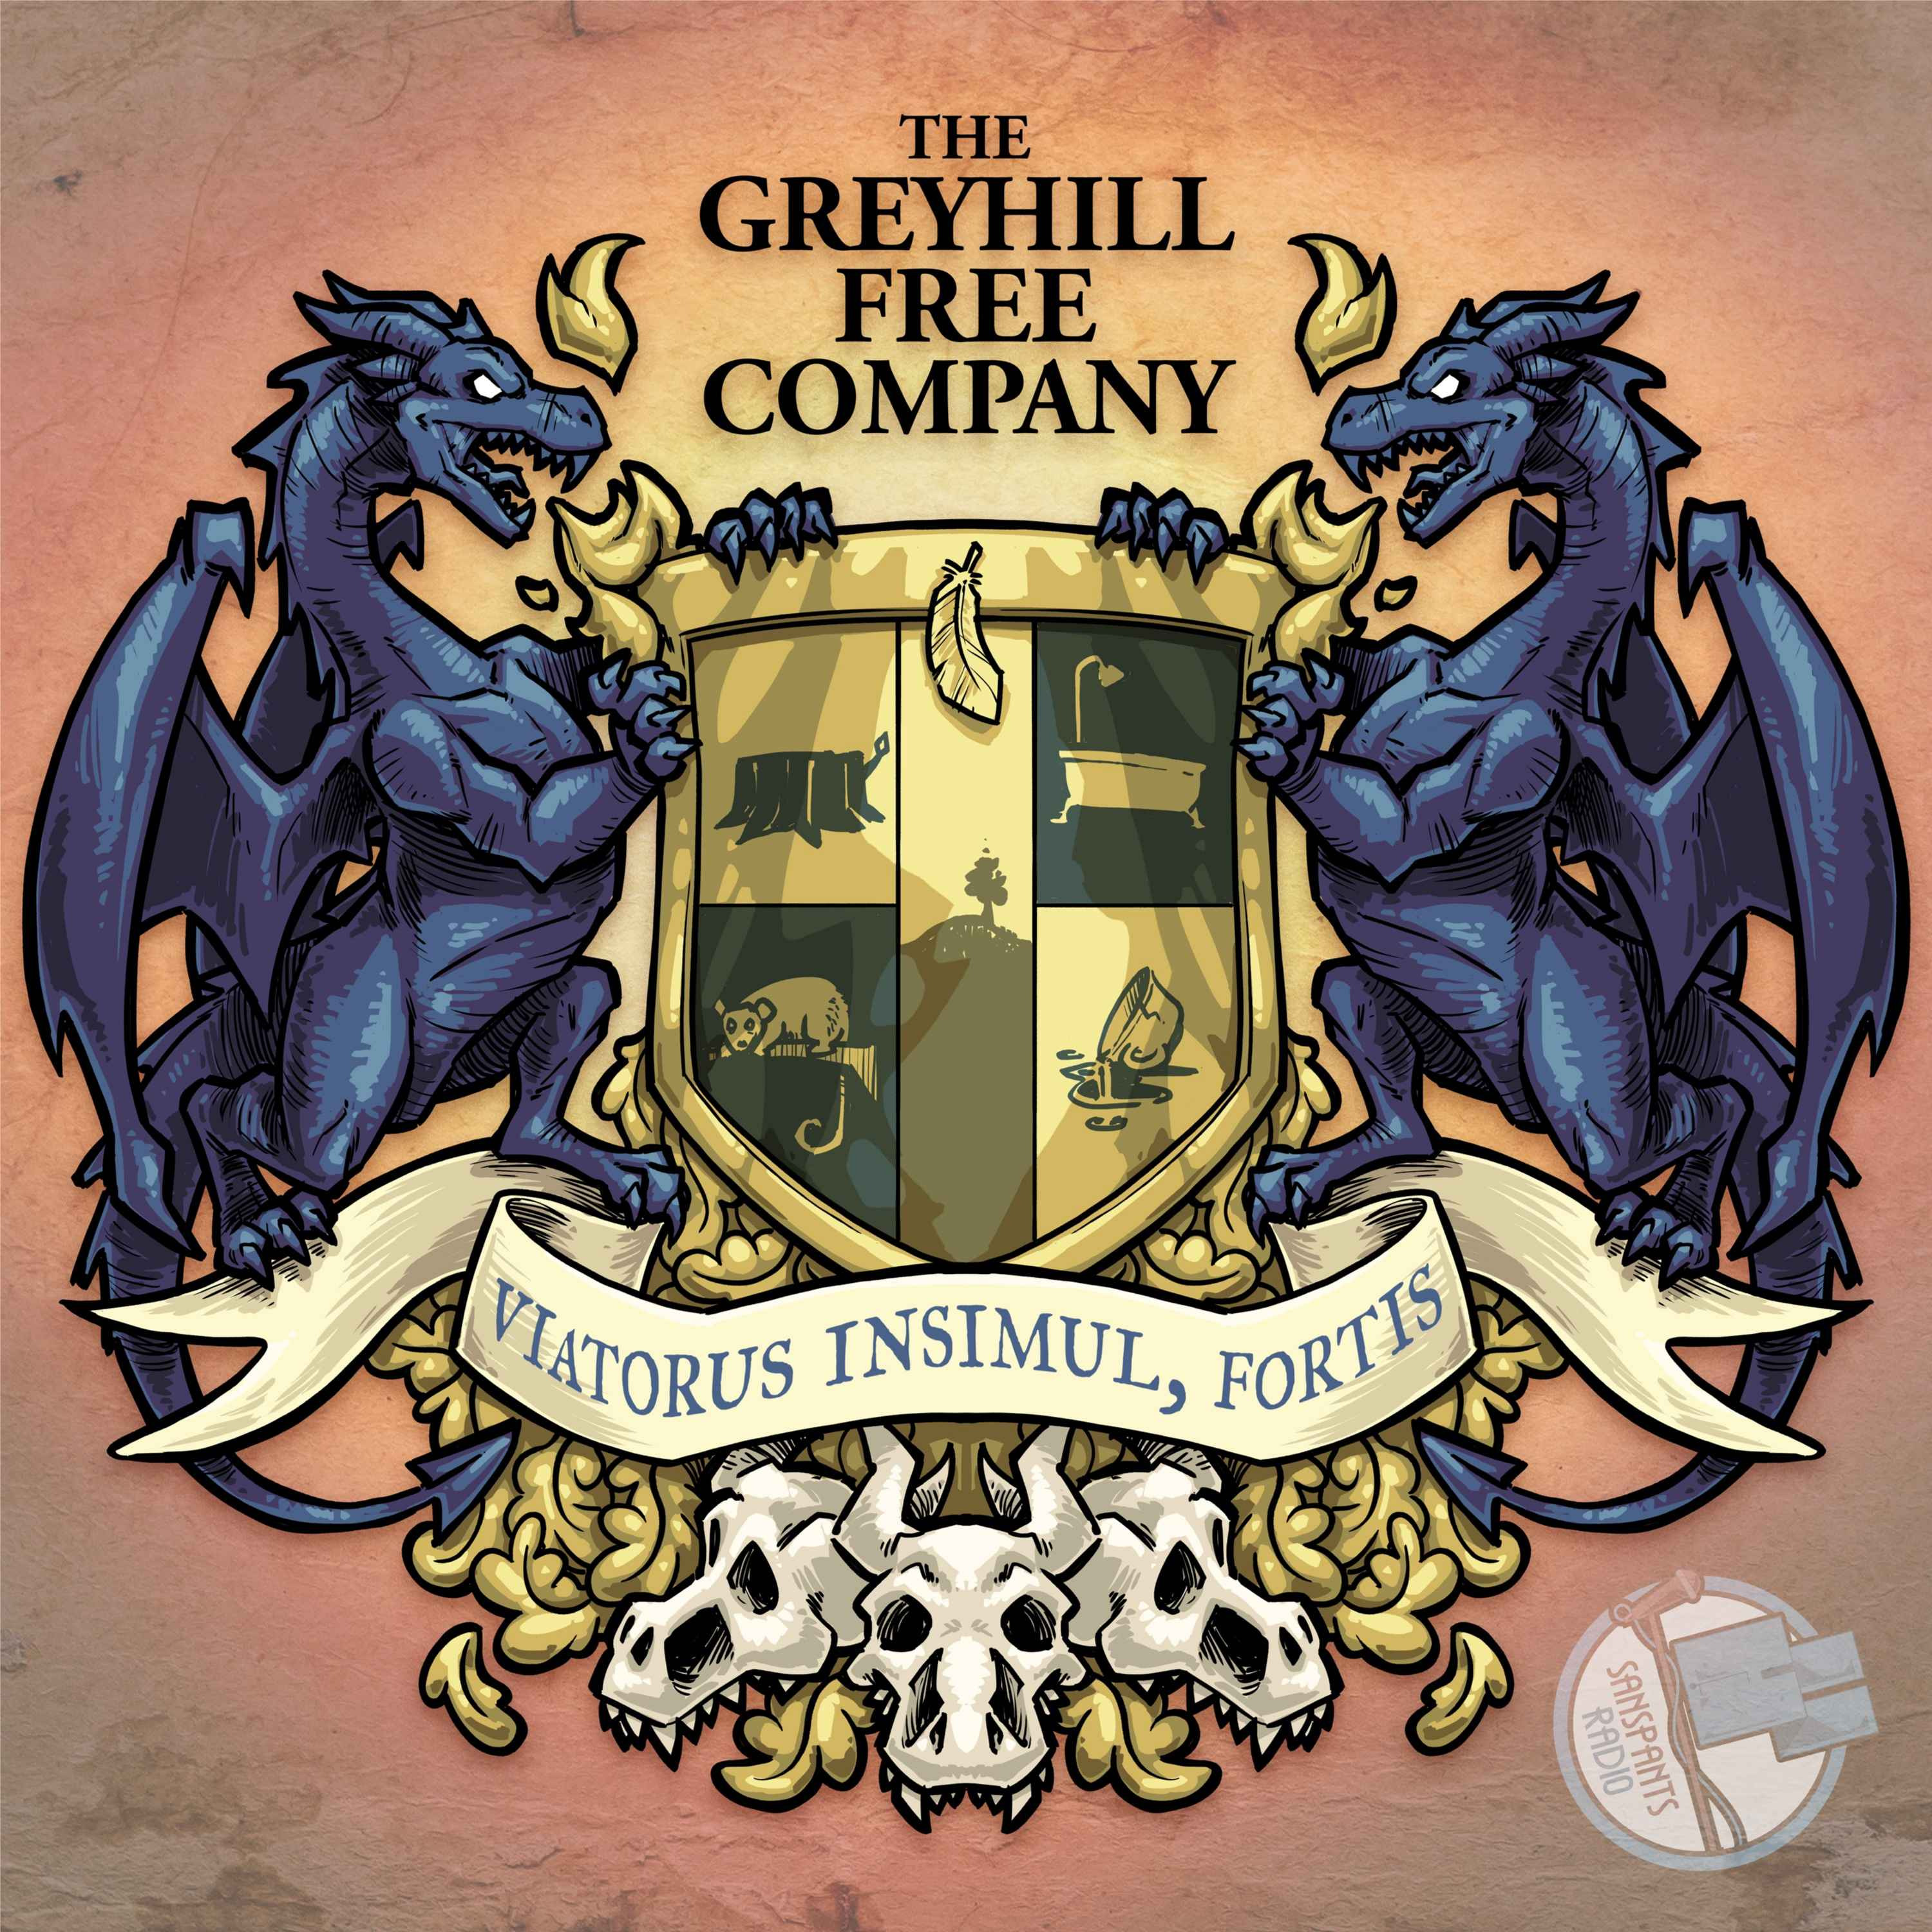 Stories of The Greyhill Free Company II #20 Fireside Introspection